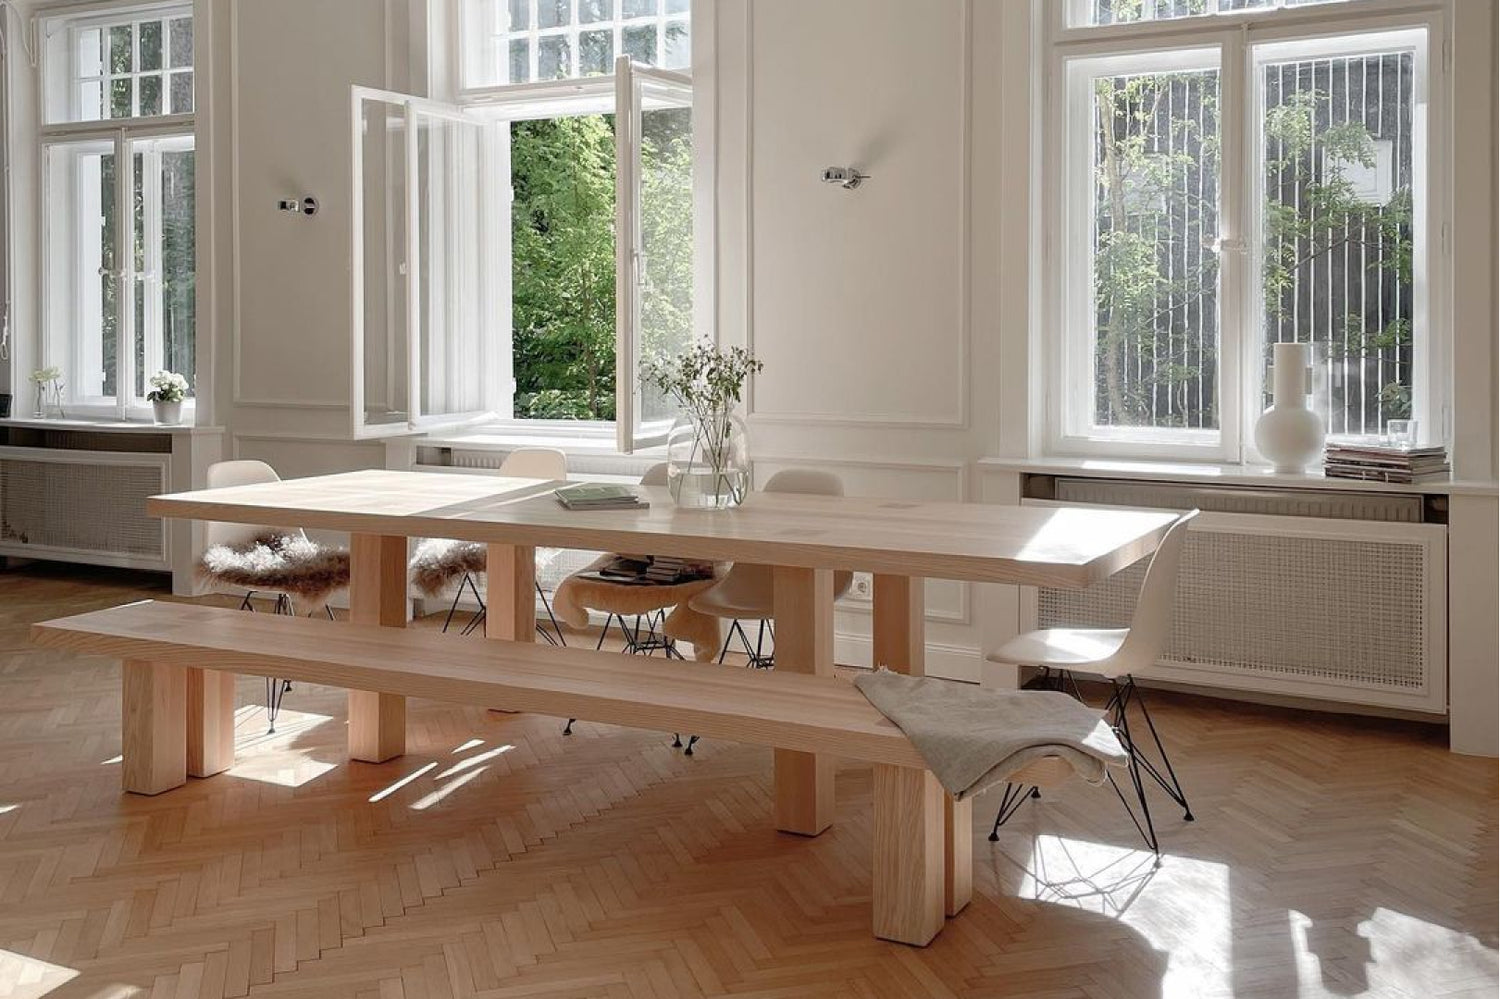 Hem - UGC image of a dining room featuring the Max Table + Benches Set designed by Max Lamb.